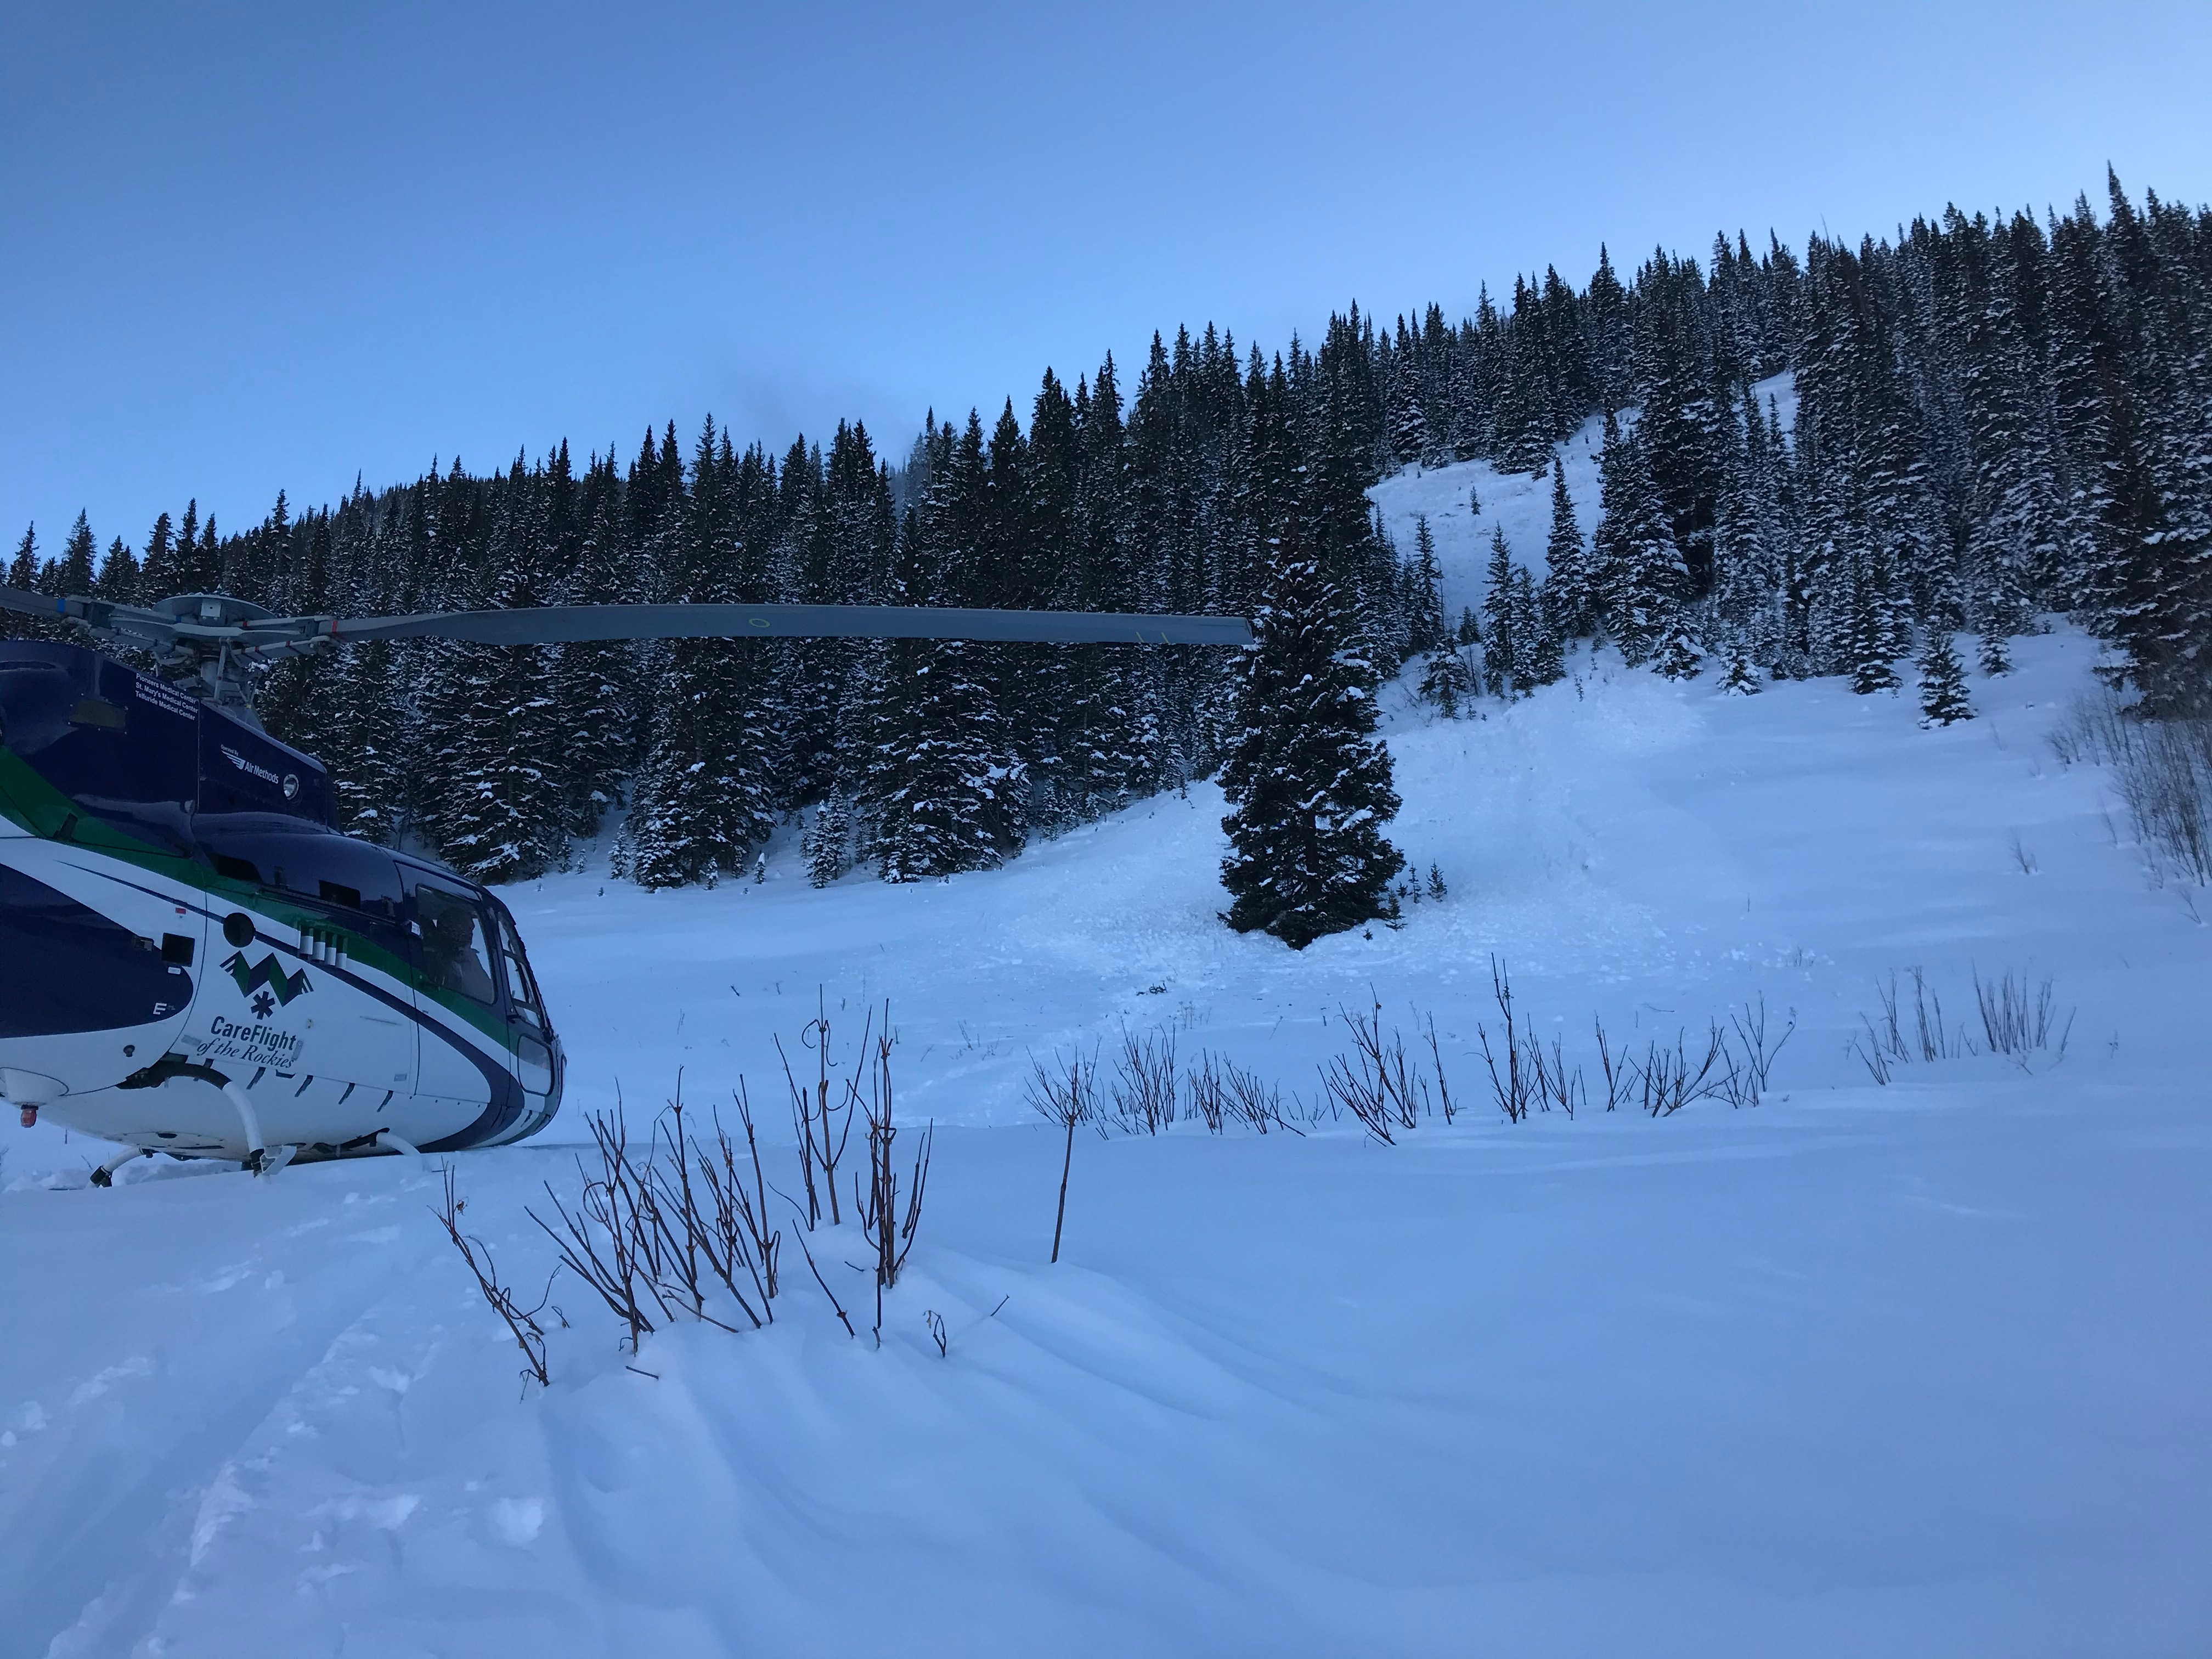 Site where an avalanche injured a snowboarder